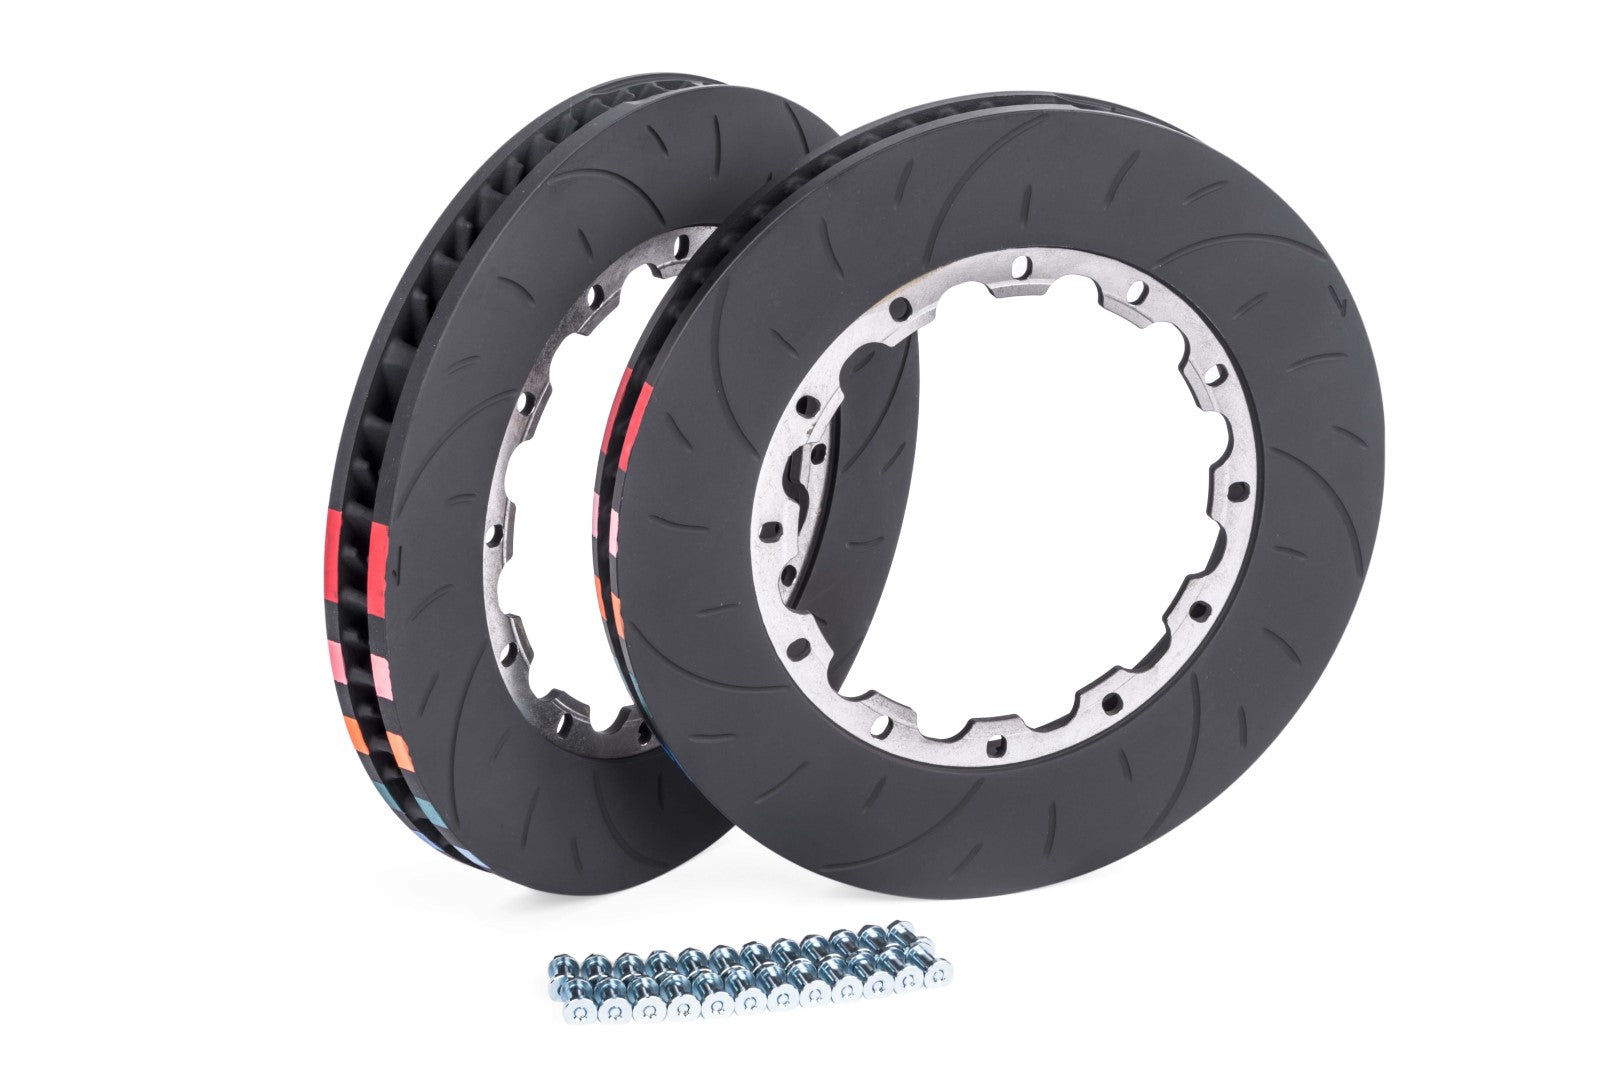 APR Brakes - 2 Piece Replacement Rings and Hardware For APR Brake Systems